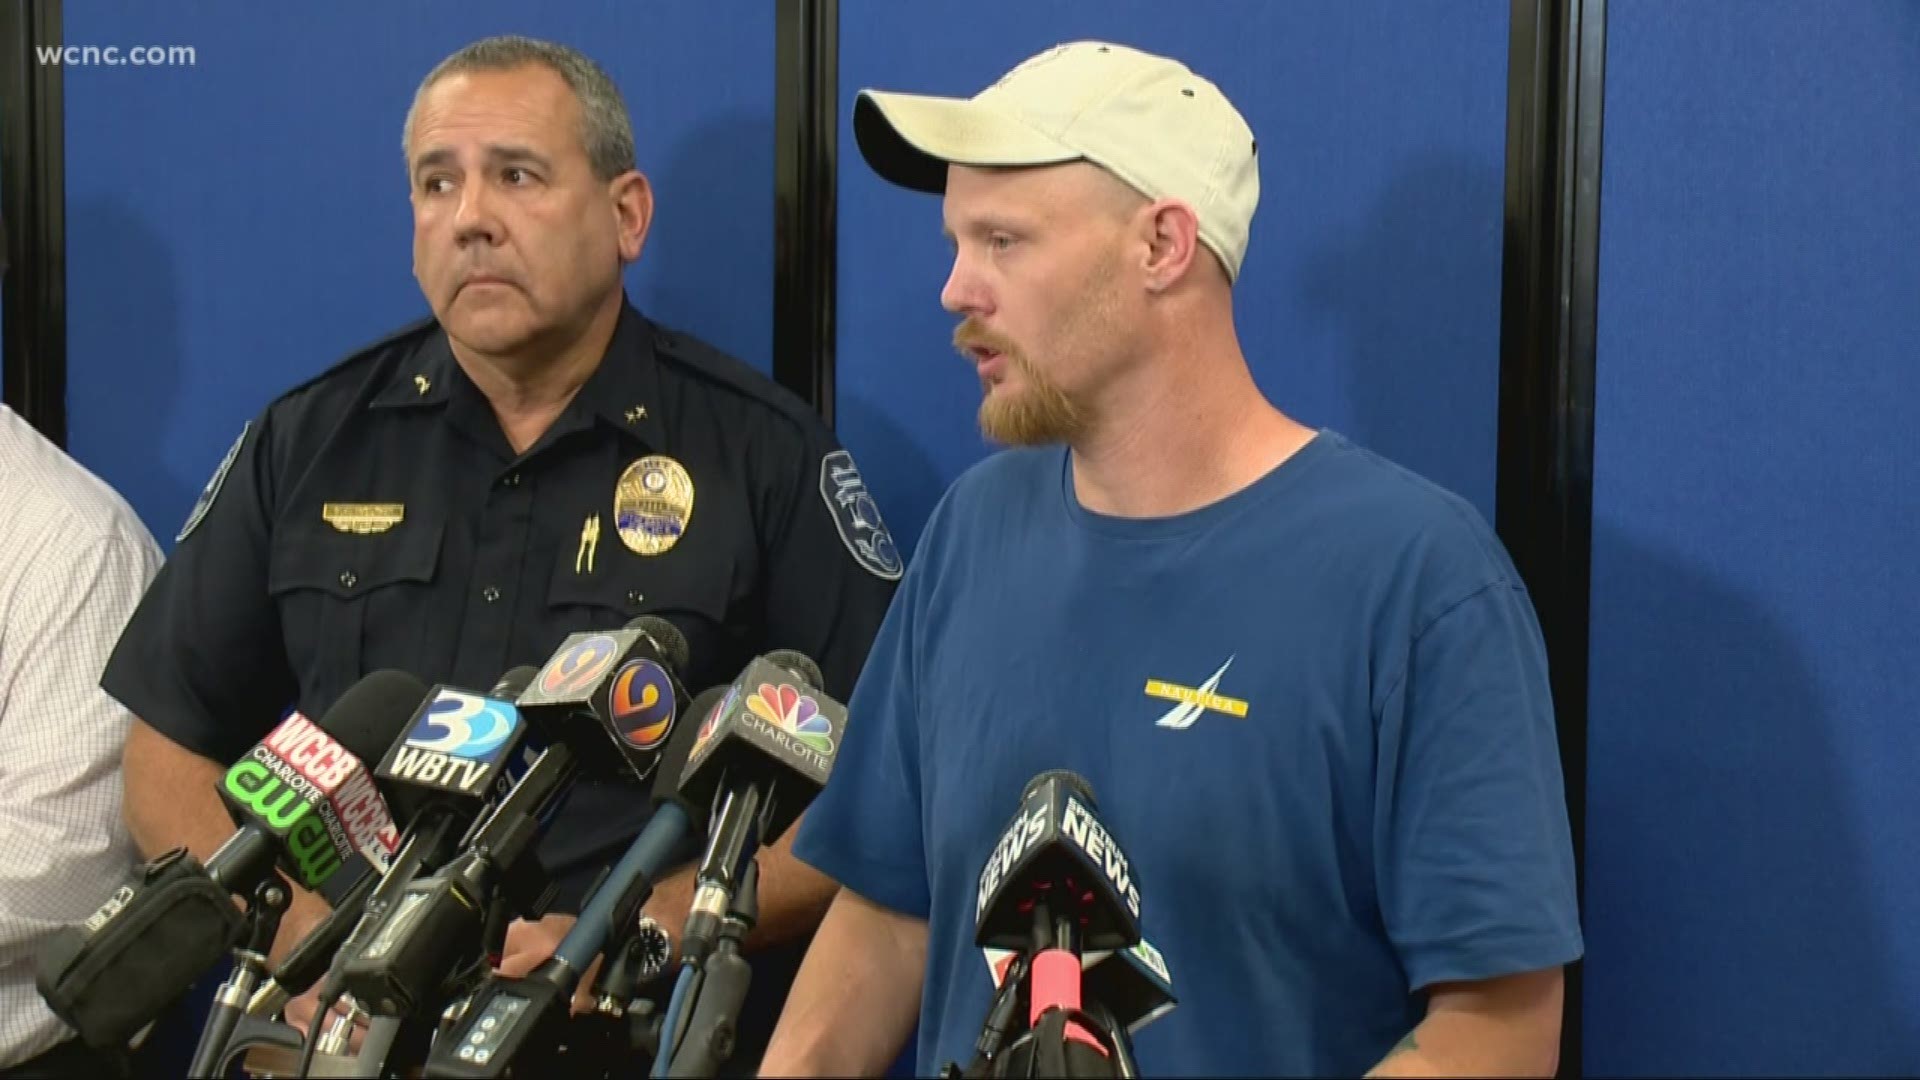 As the search for Maddox Ritch continues, the 6-year-old boy's father spoke at a news conference in Gastonia Wednesday.